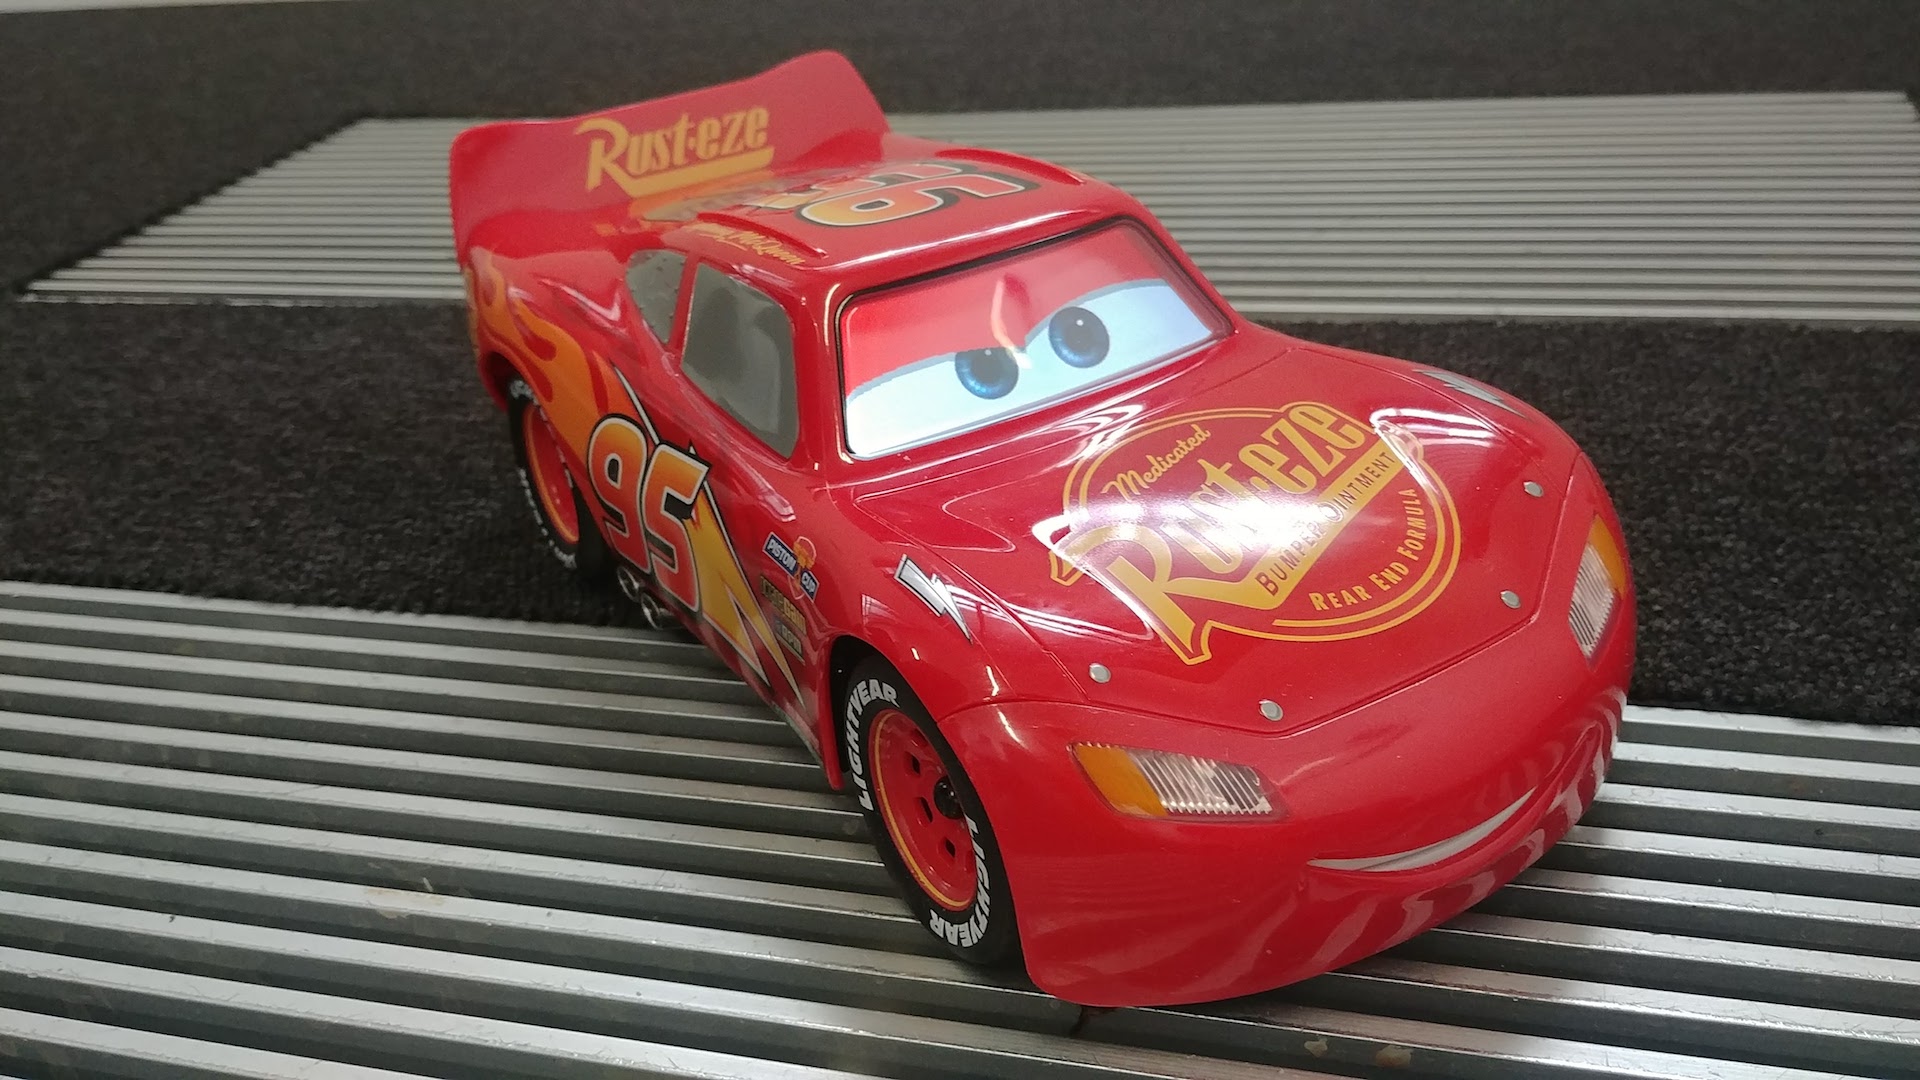 Sphero’s Cars 3 Lightning McQueen racing car is ‘the most advanced